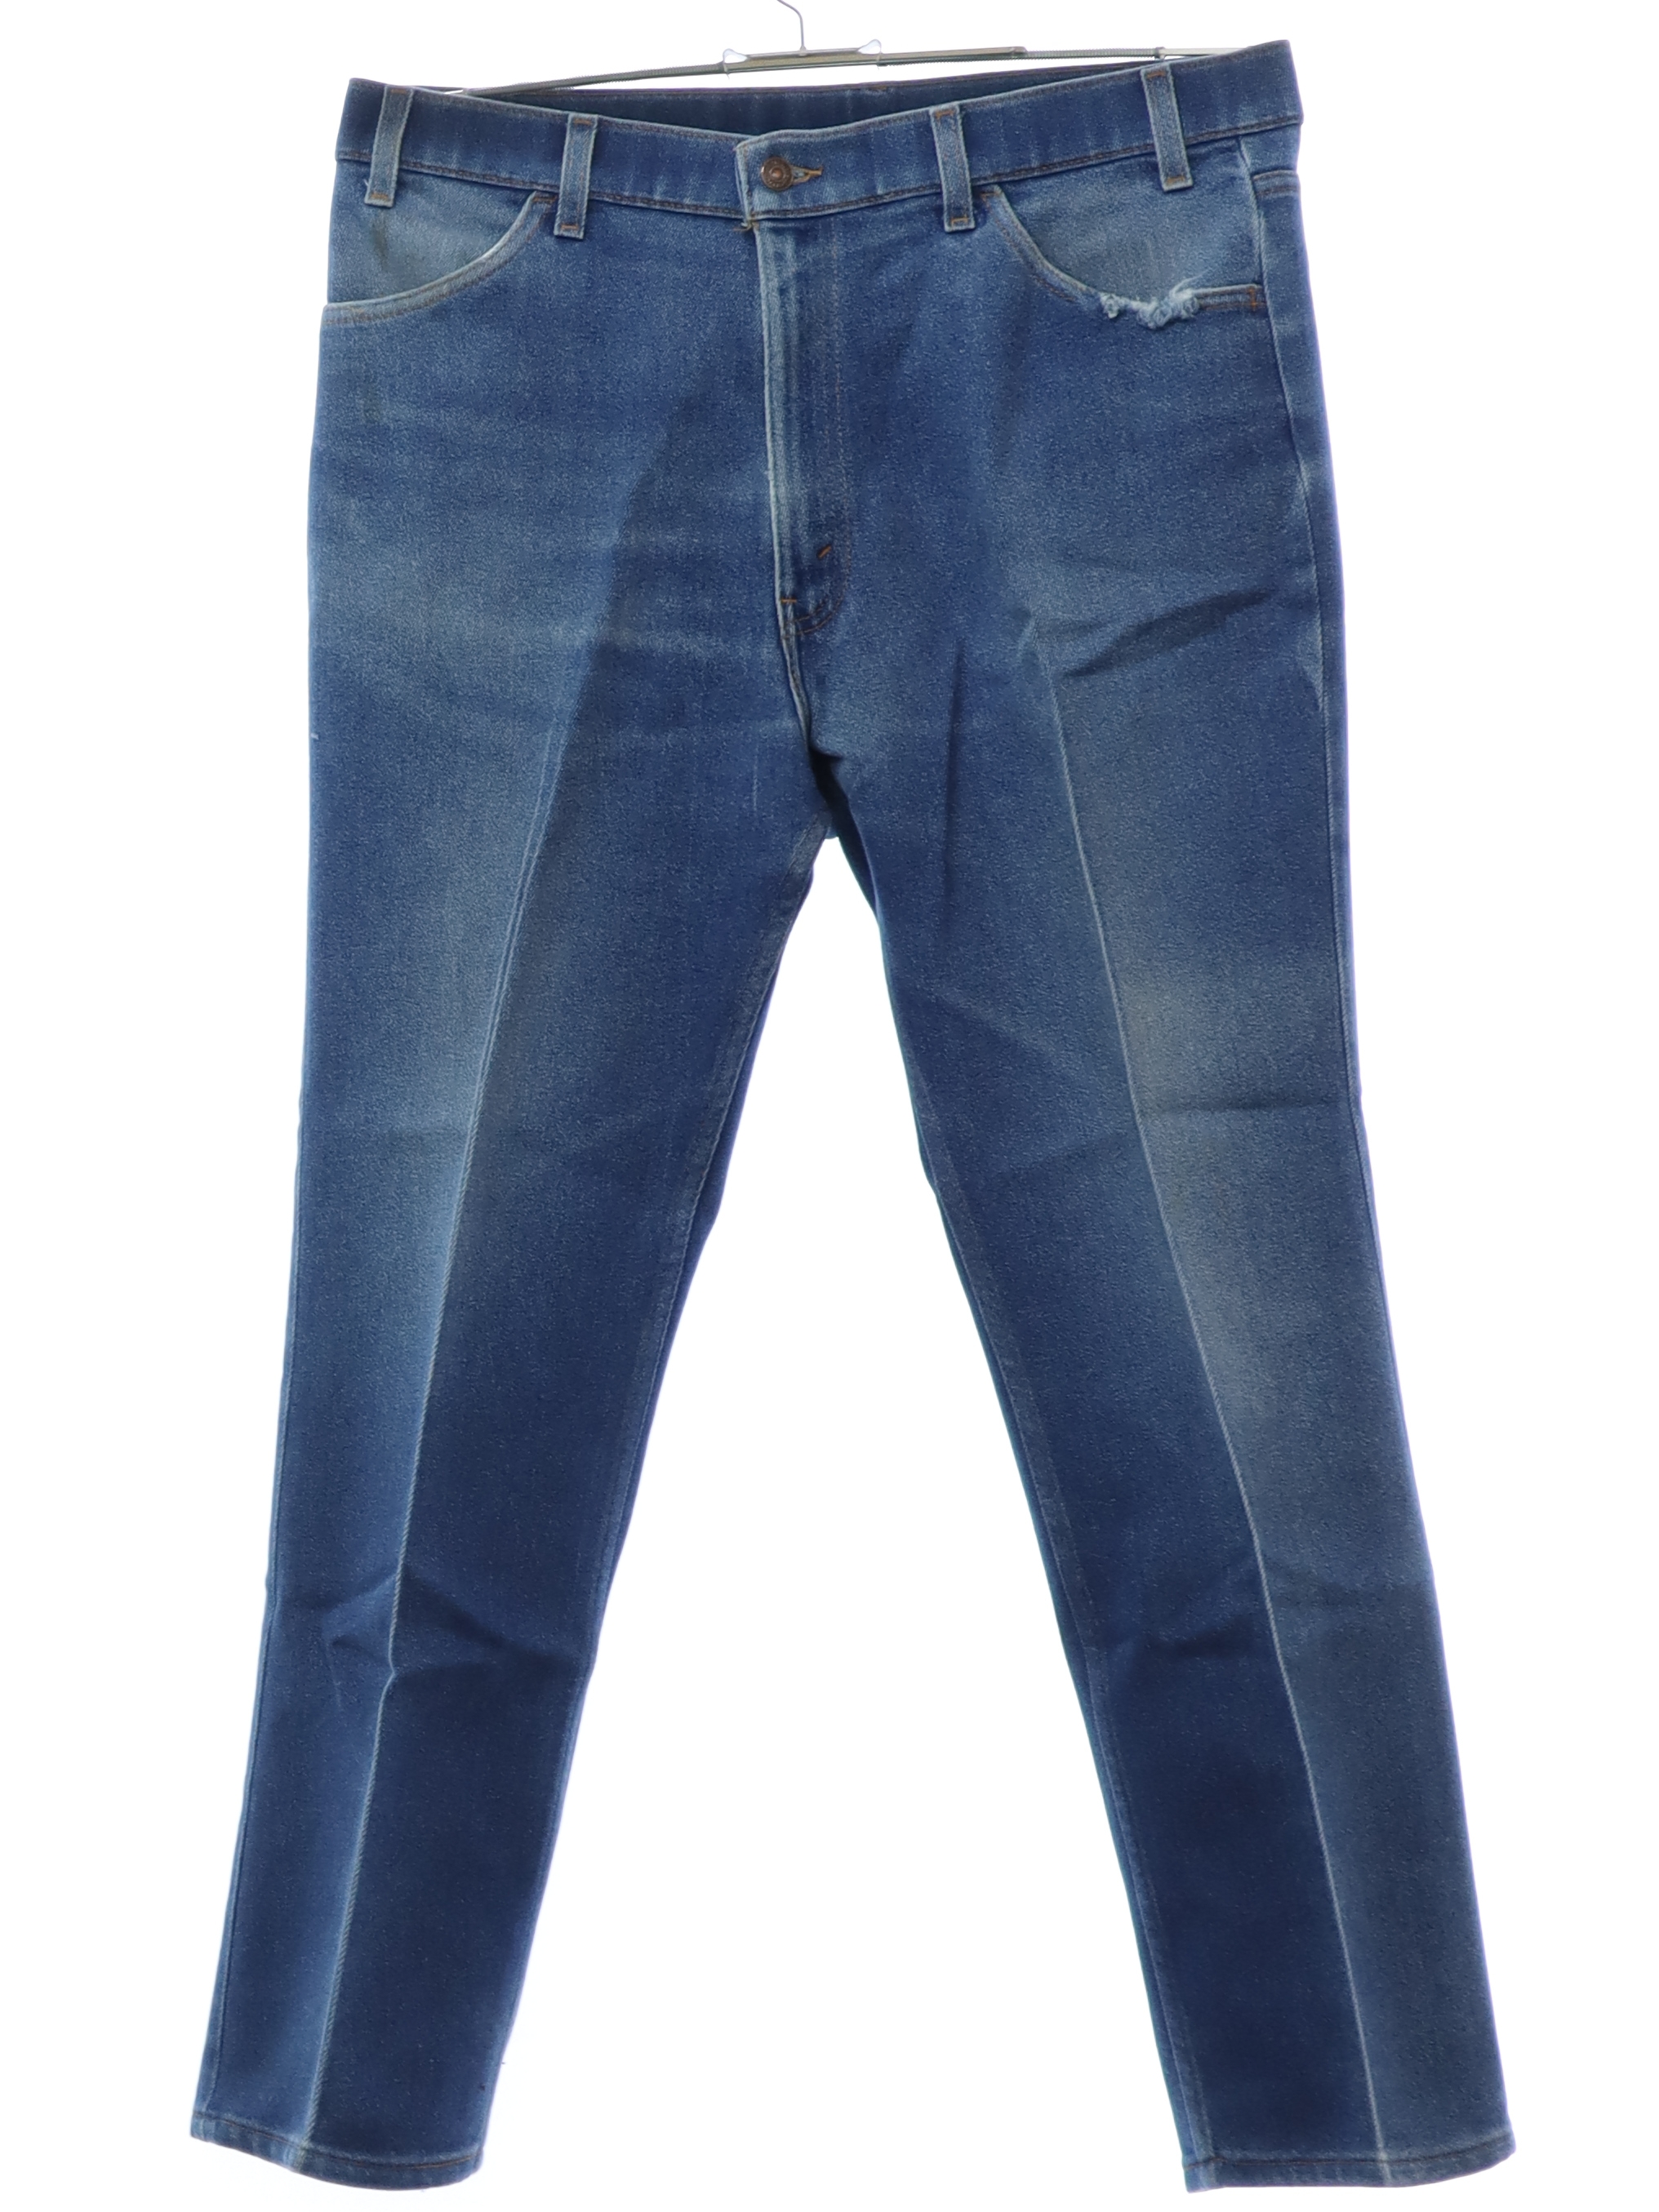 cotton polyester blend jeans